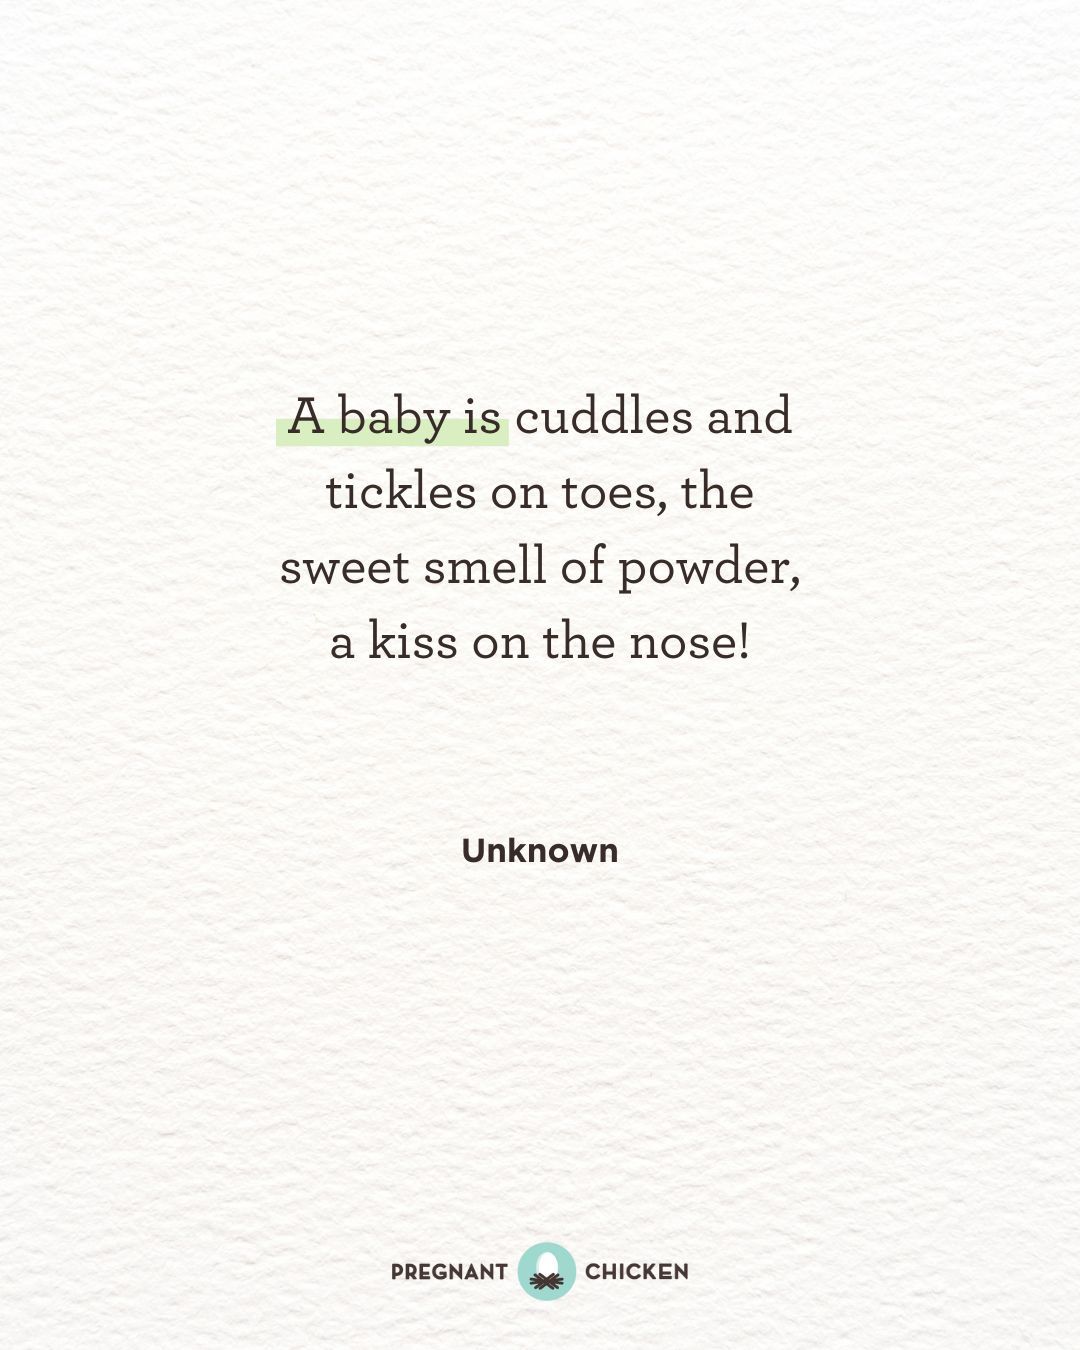 A baby is cuddles and tickles on toes, the sweet smell of powder, a kiss on the nose!